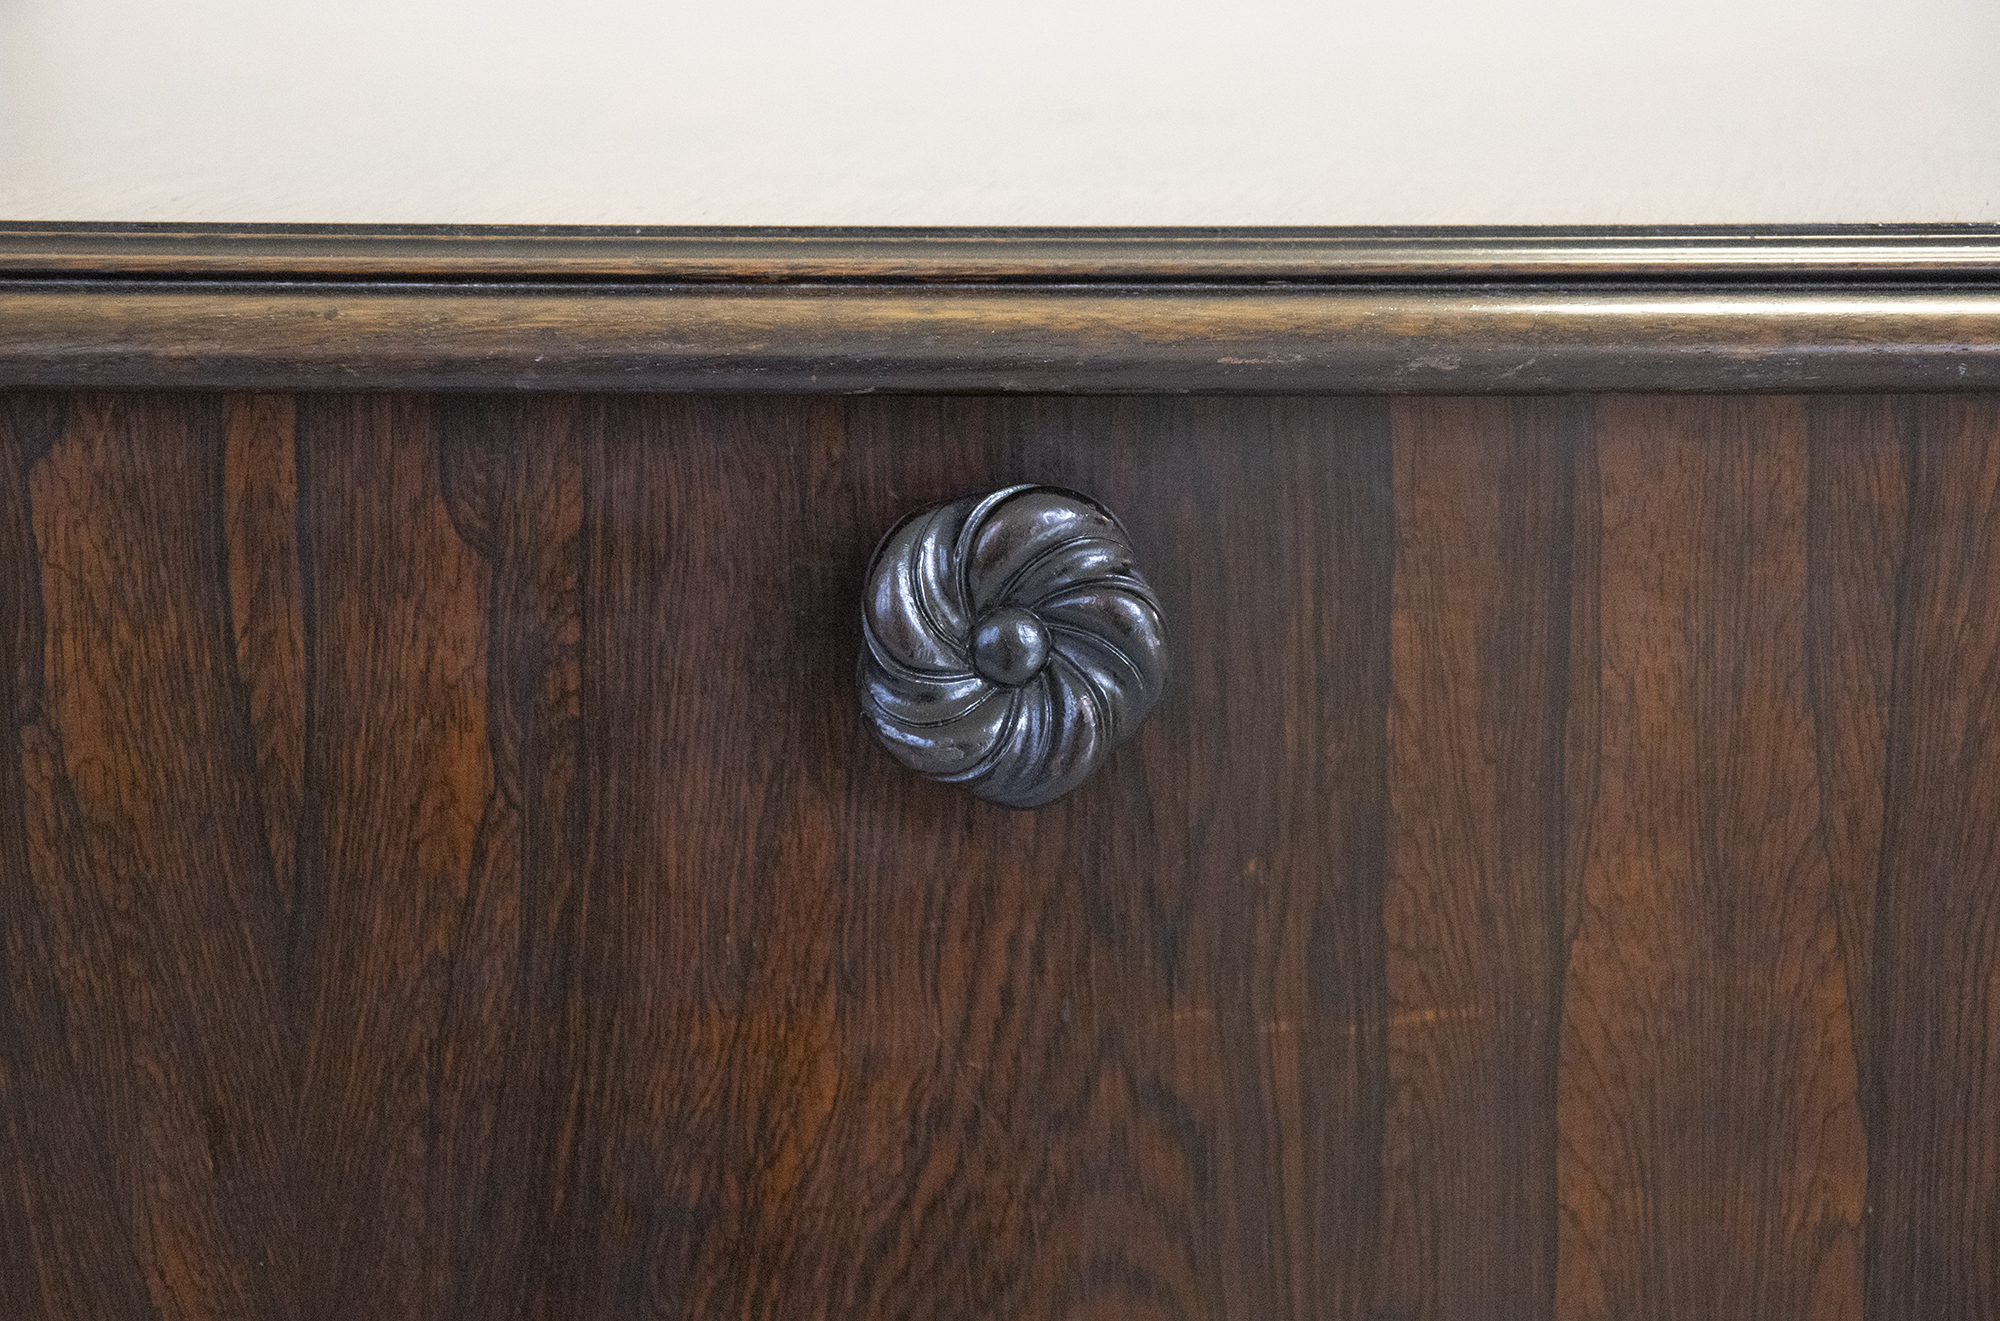 Close up of a flower-shaped wooden knob on the side of the piano